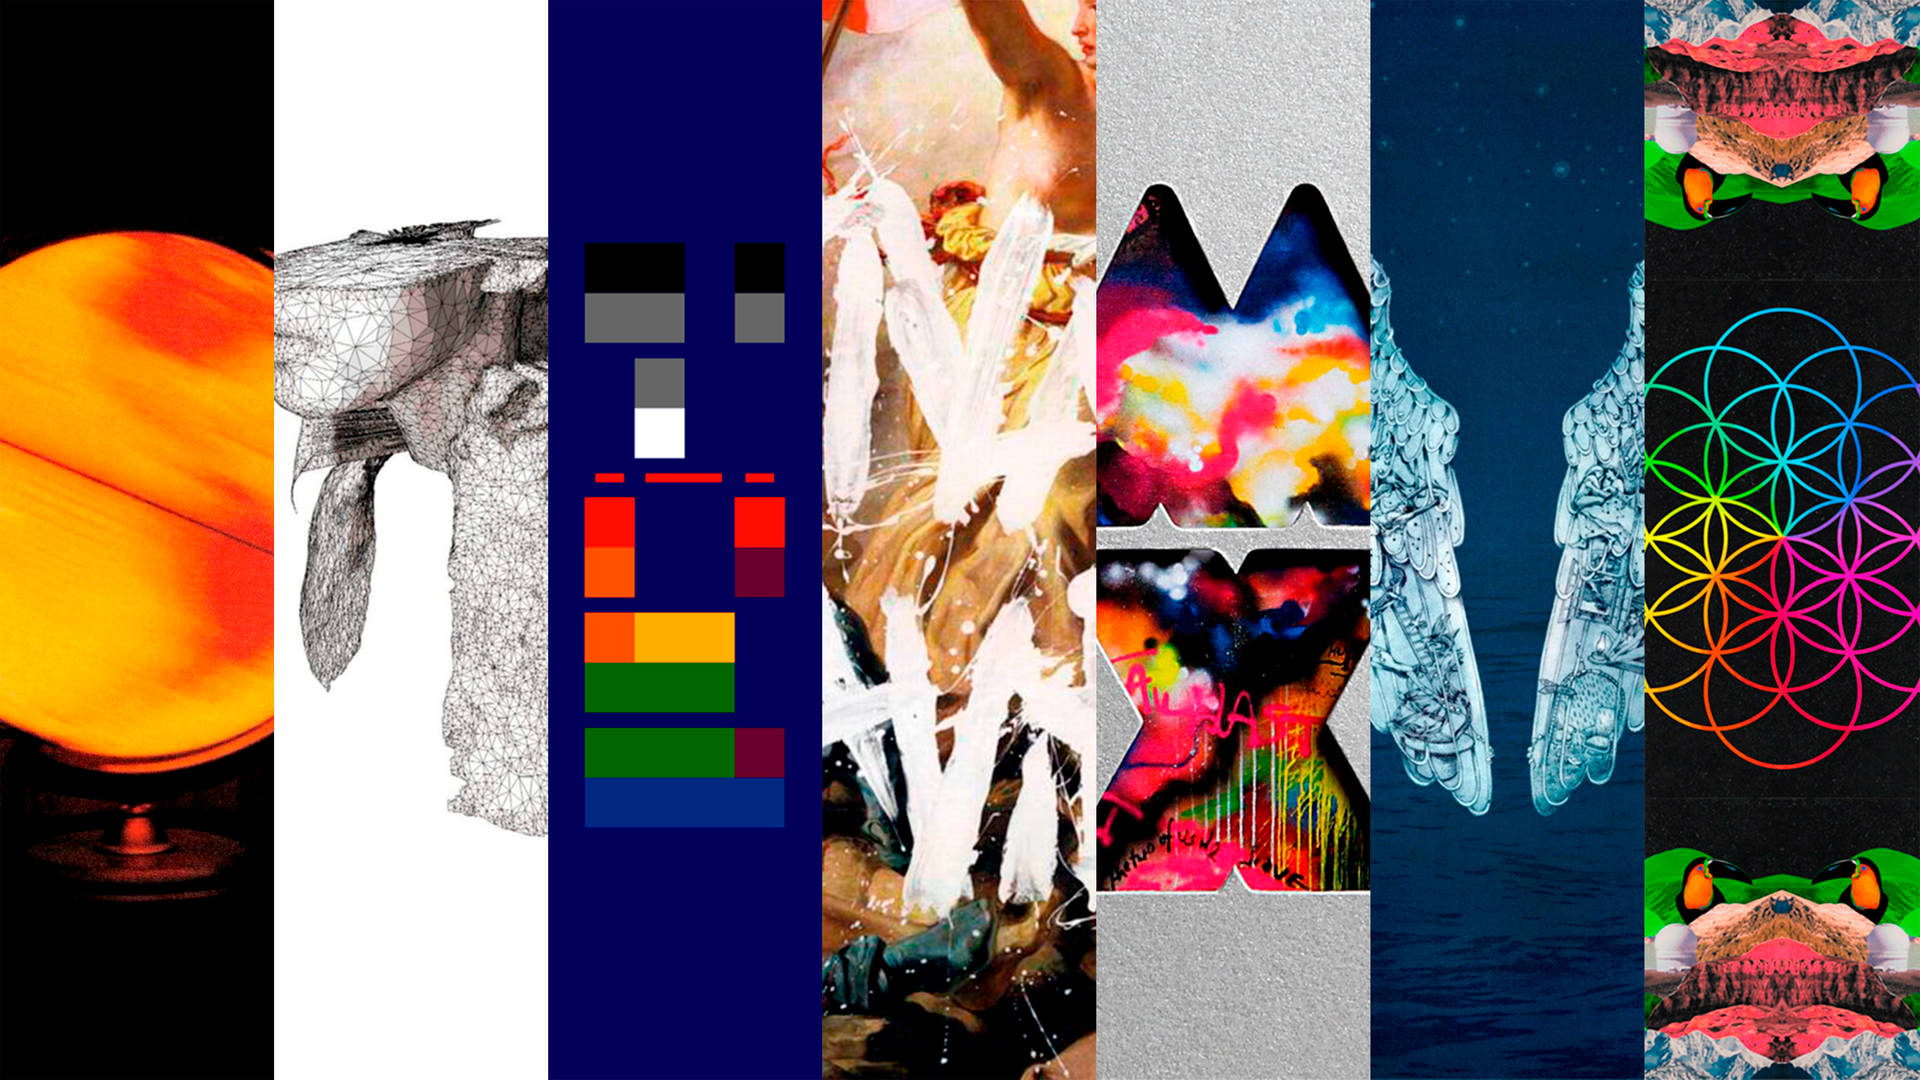 Coldplay Album Covers Collage